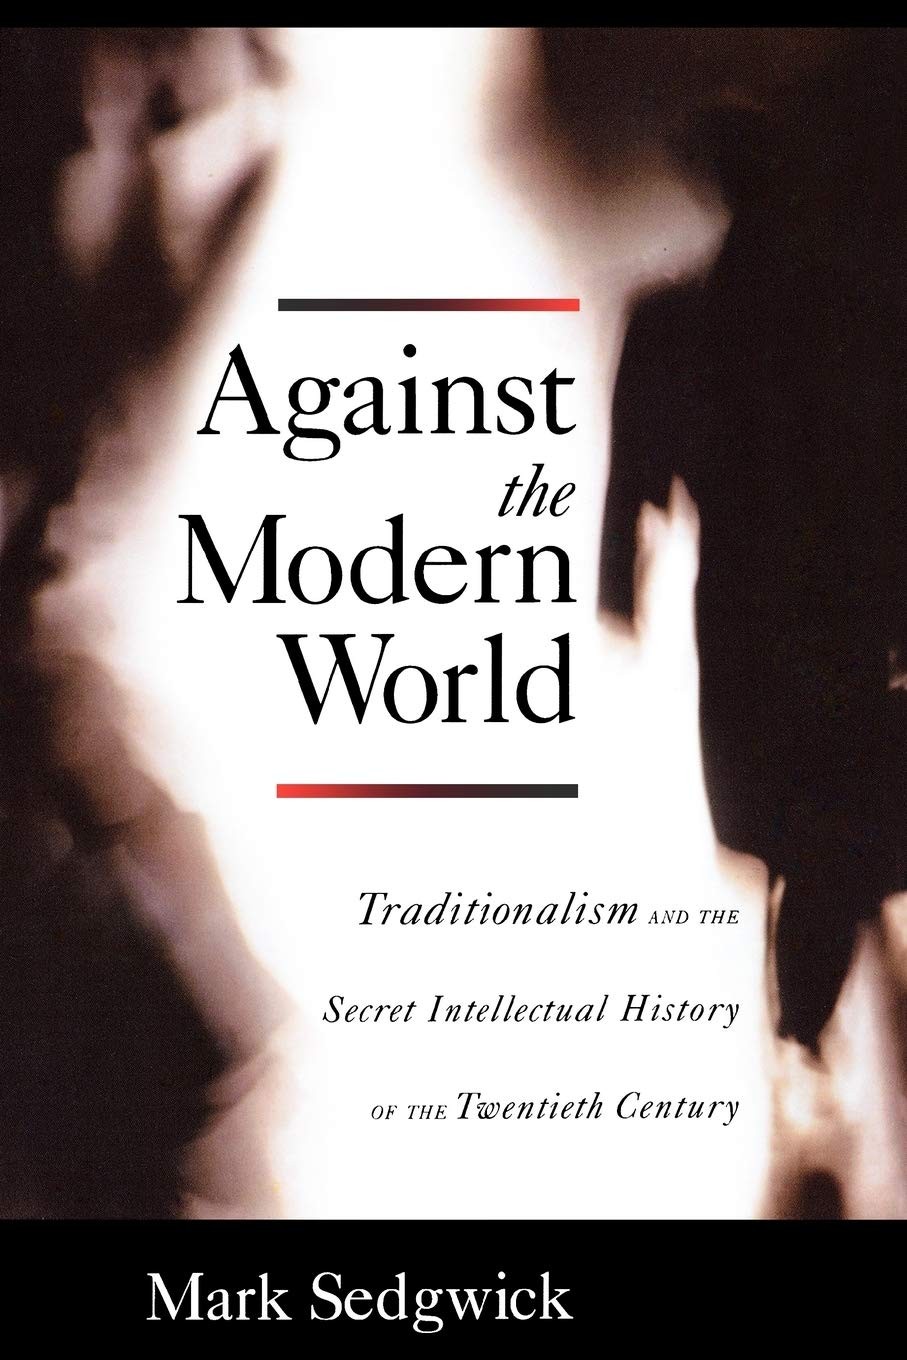 Against the Modern World: Traditionalism and the Secret Intellectual History of the Twentieth Century